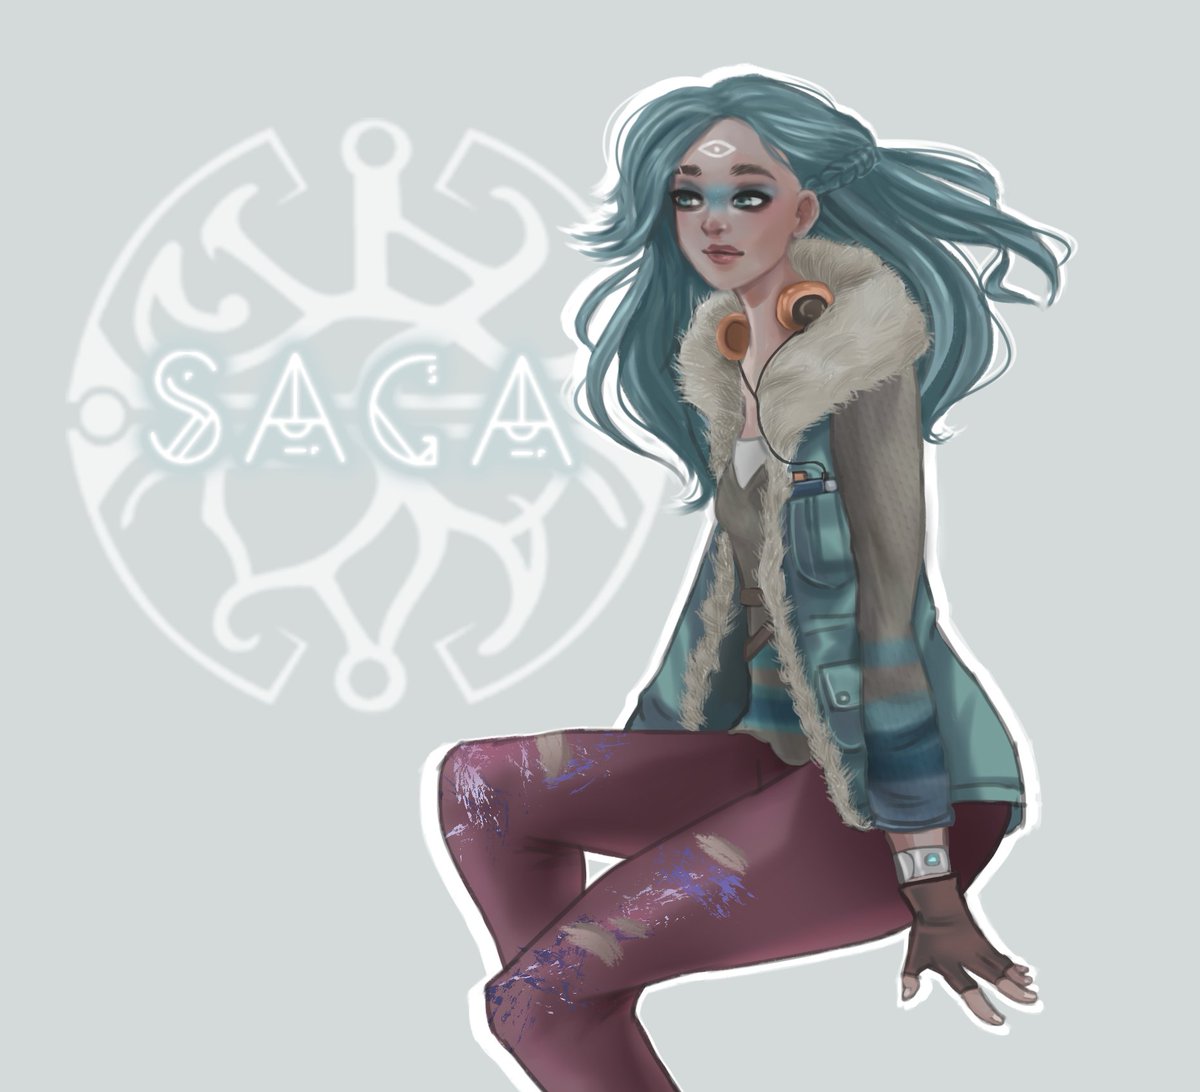 Peachy Comms Open Saga From Dreamfall Chapters One Of My Favourite Game Series Ragso Art Digitalart Fanart Dreamfallchapters Thelongestjourney Tlj T Co Cwhizf9vnv